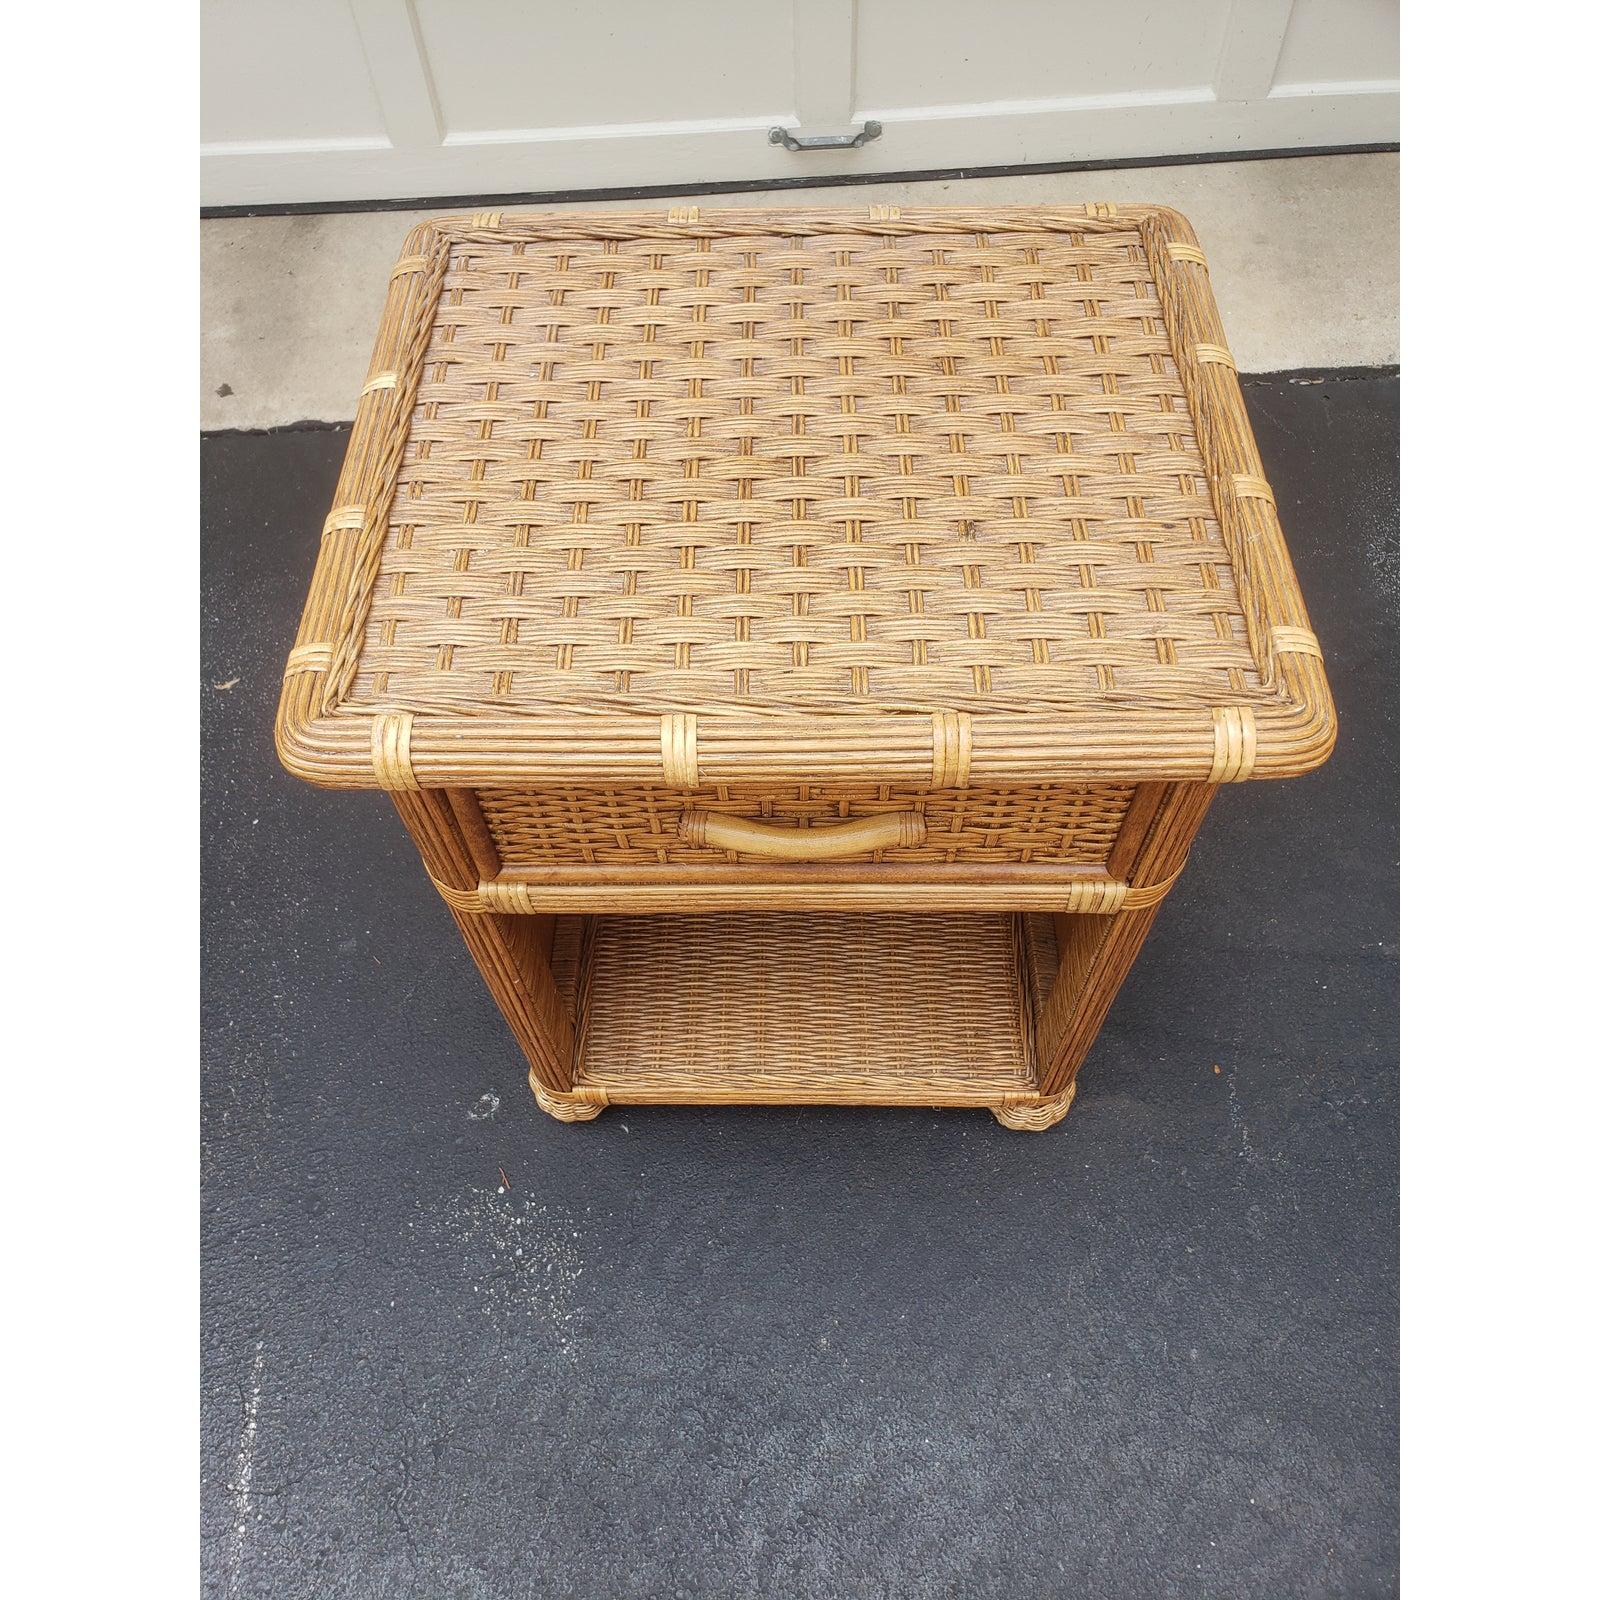 1970s Rattan wicker nightstand with drawer. Excellent condition. Drawer is working smoothly.
Measures 21